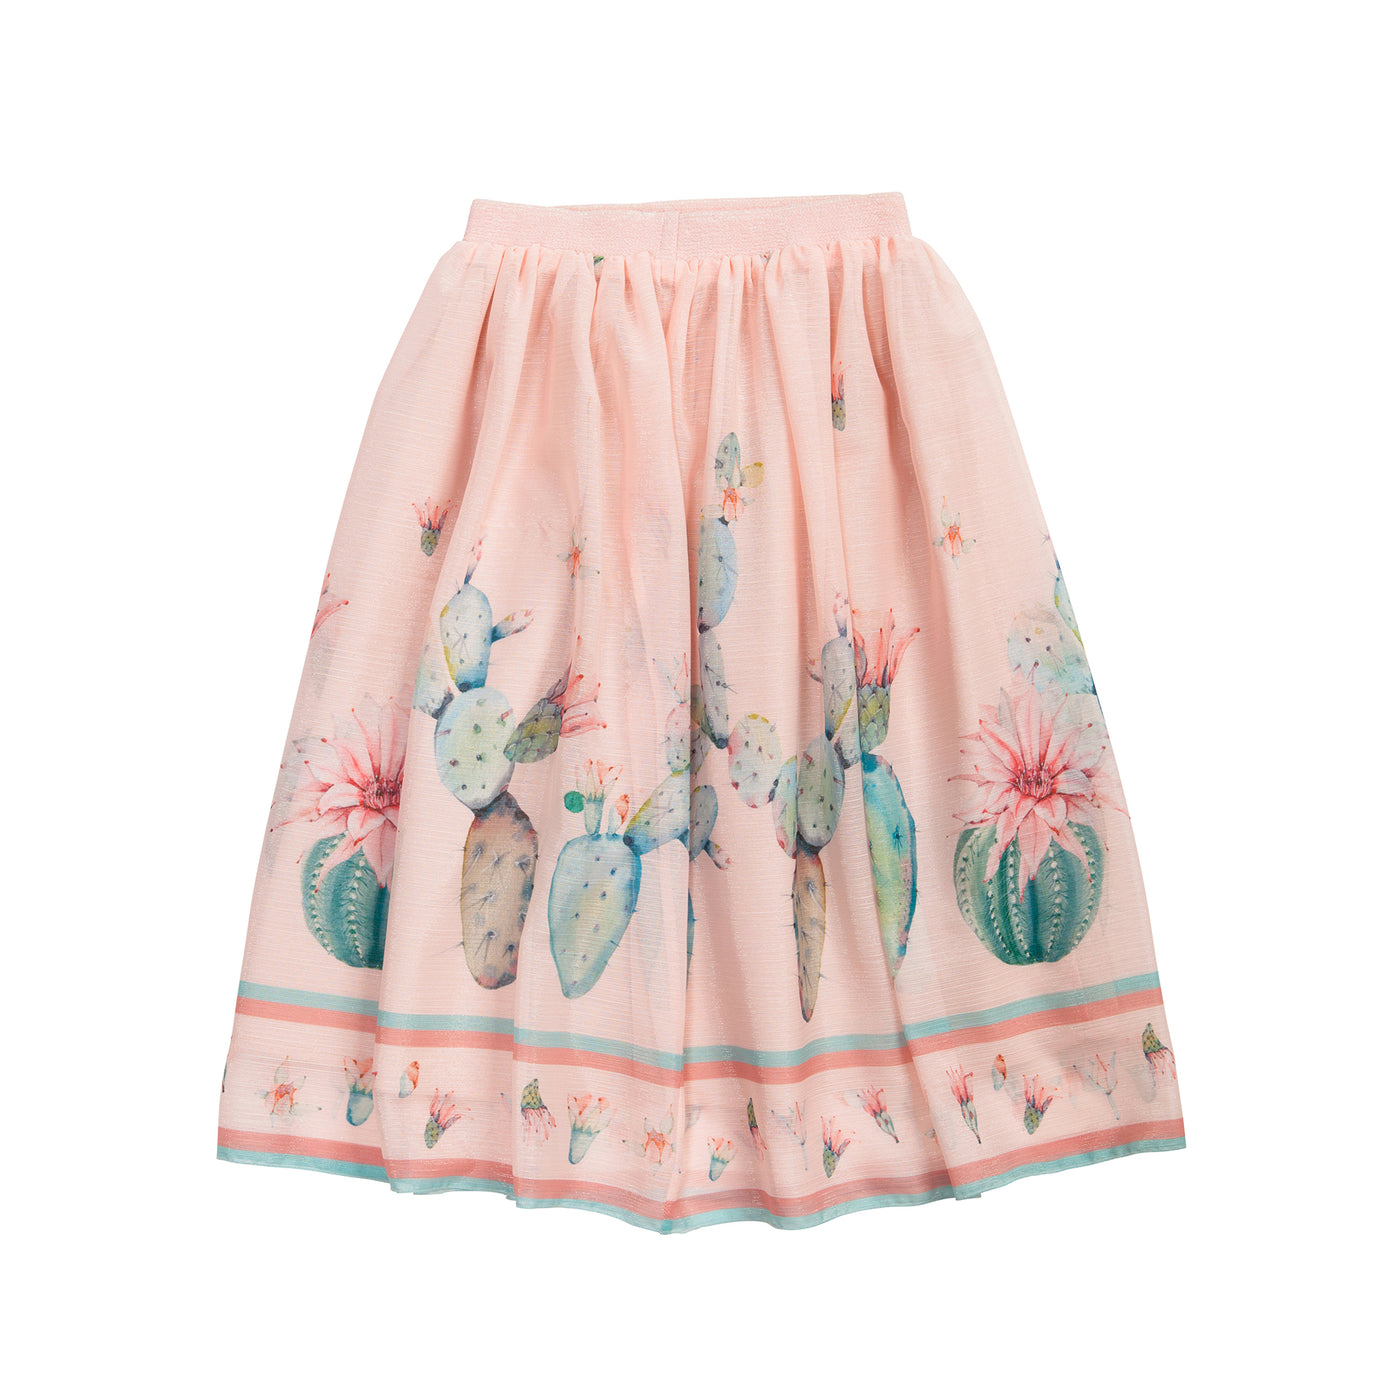 Light pink cactuses and flowers skirt